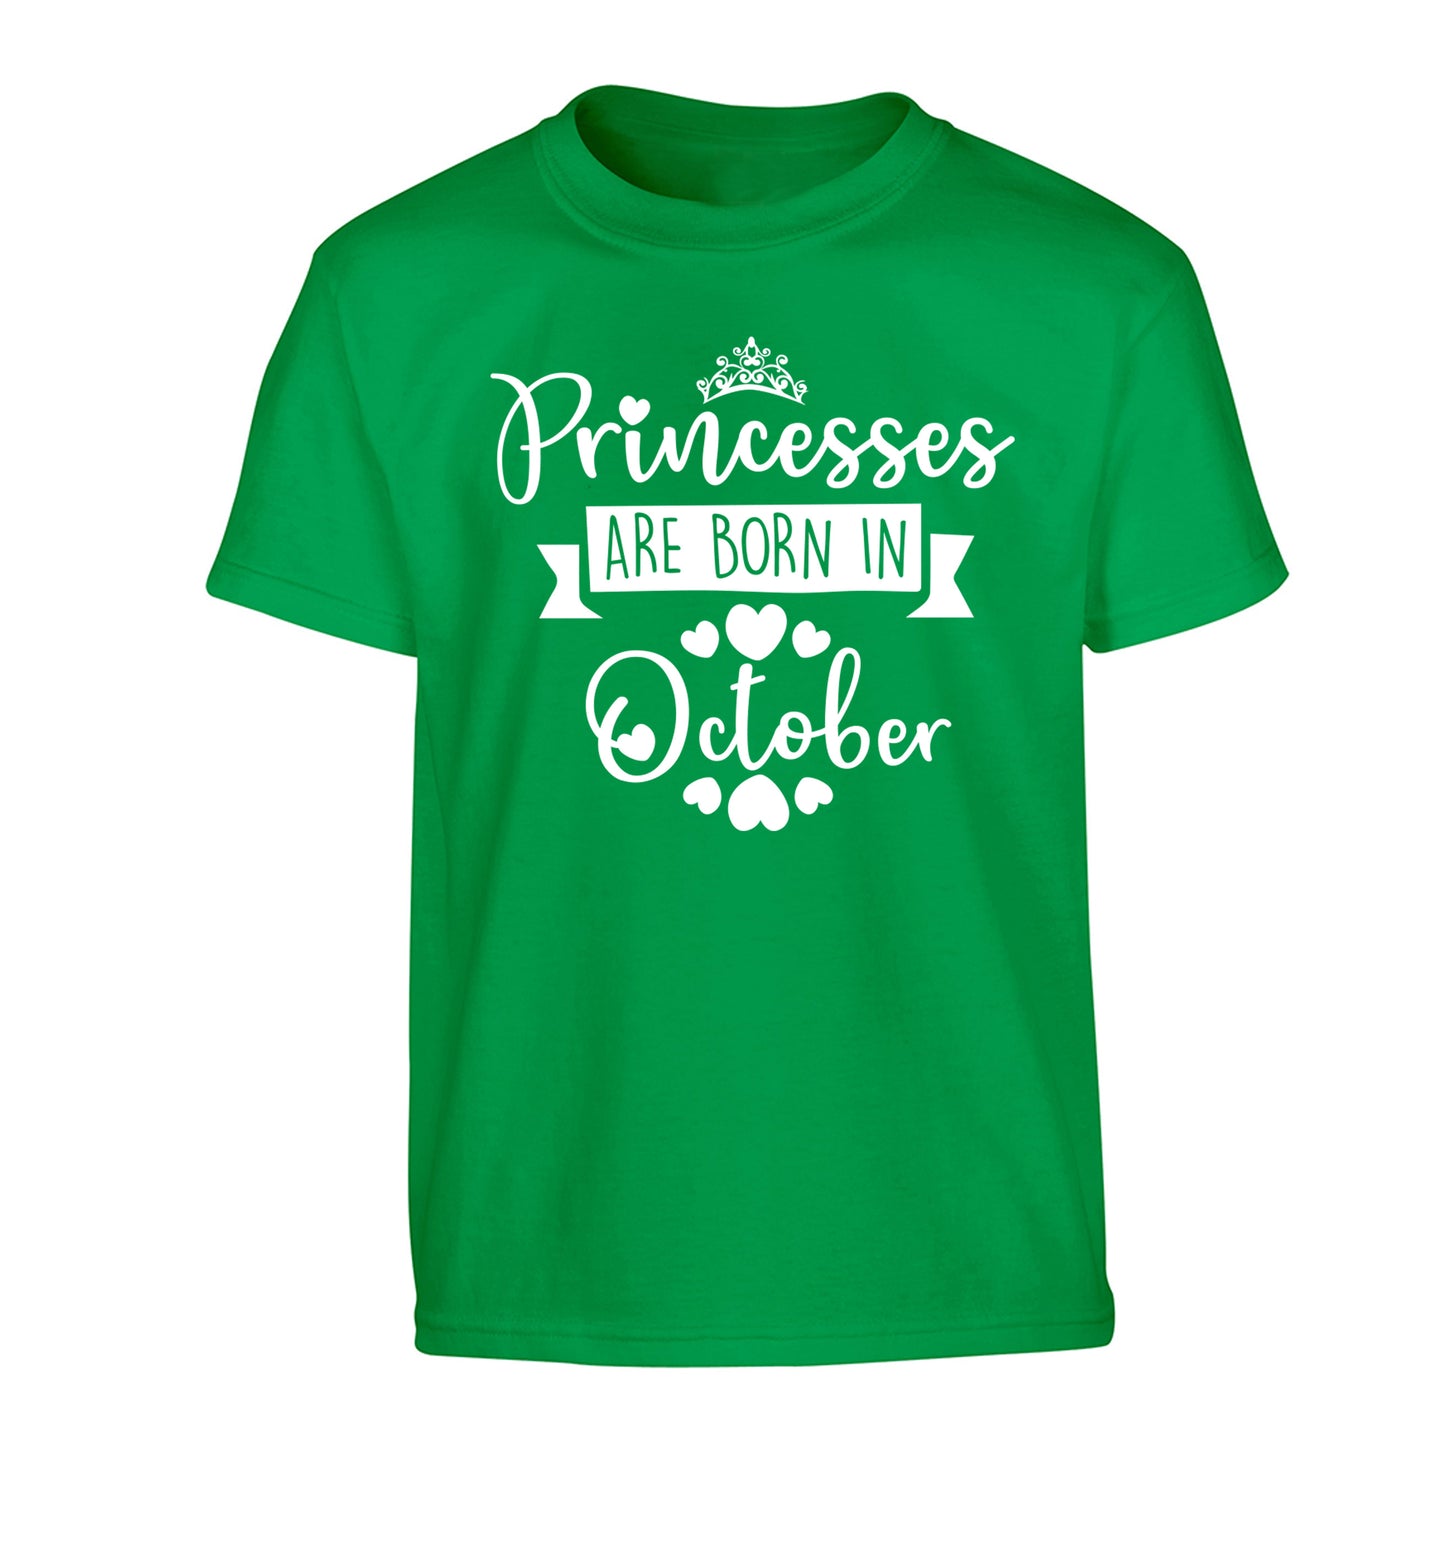 Princesses are born in October Children's green Tshirt 12-13 Years